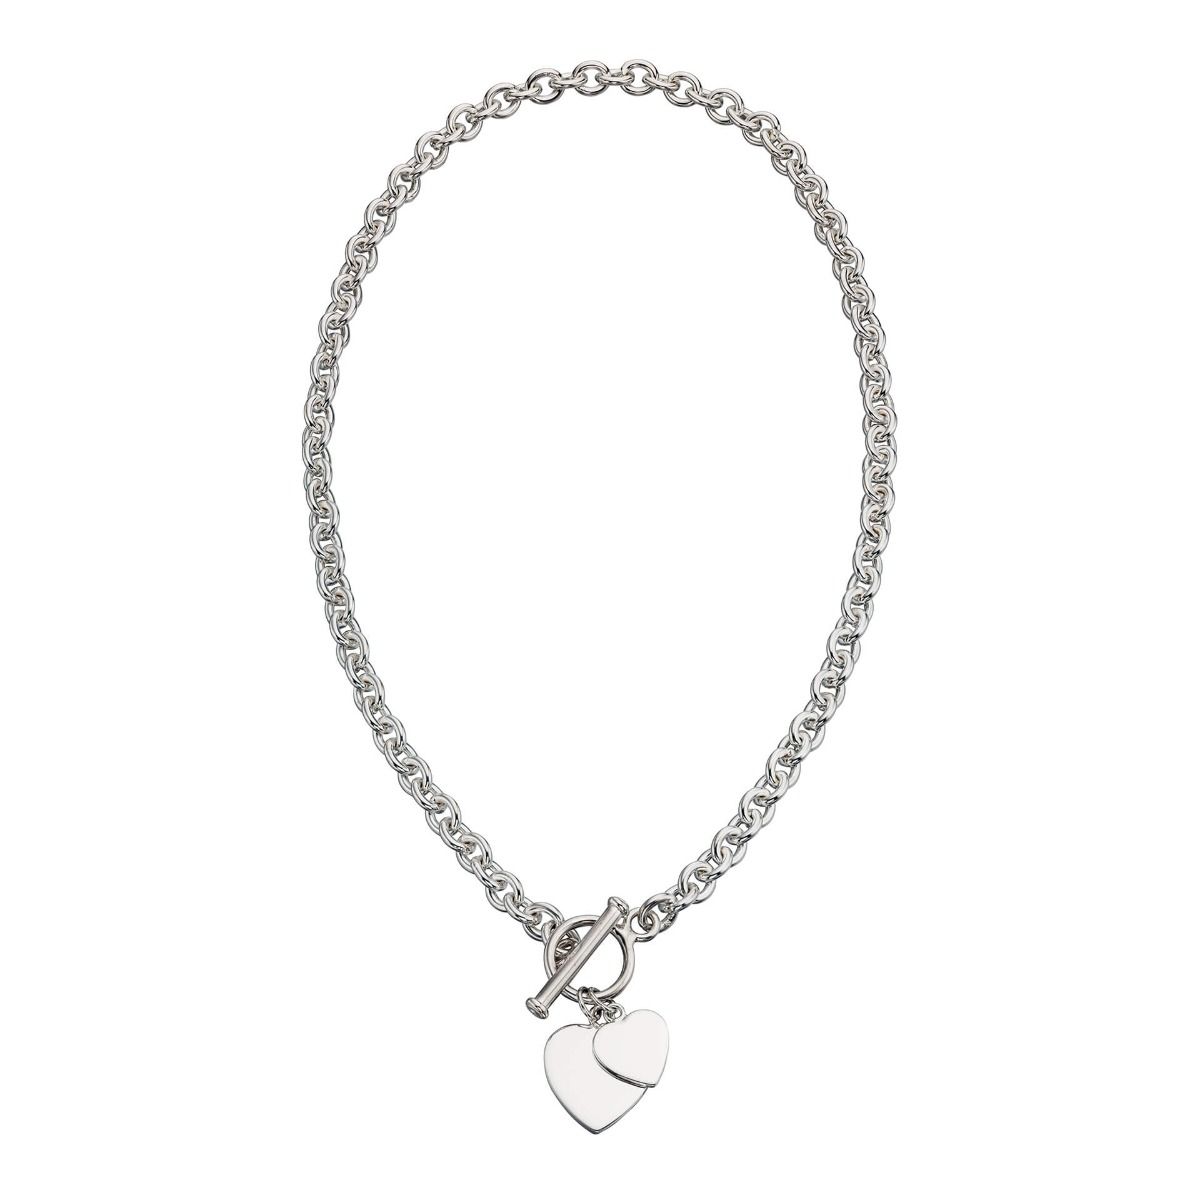 Silver T-Bar Necklace with Heart Tags